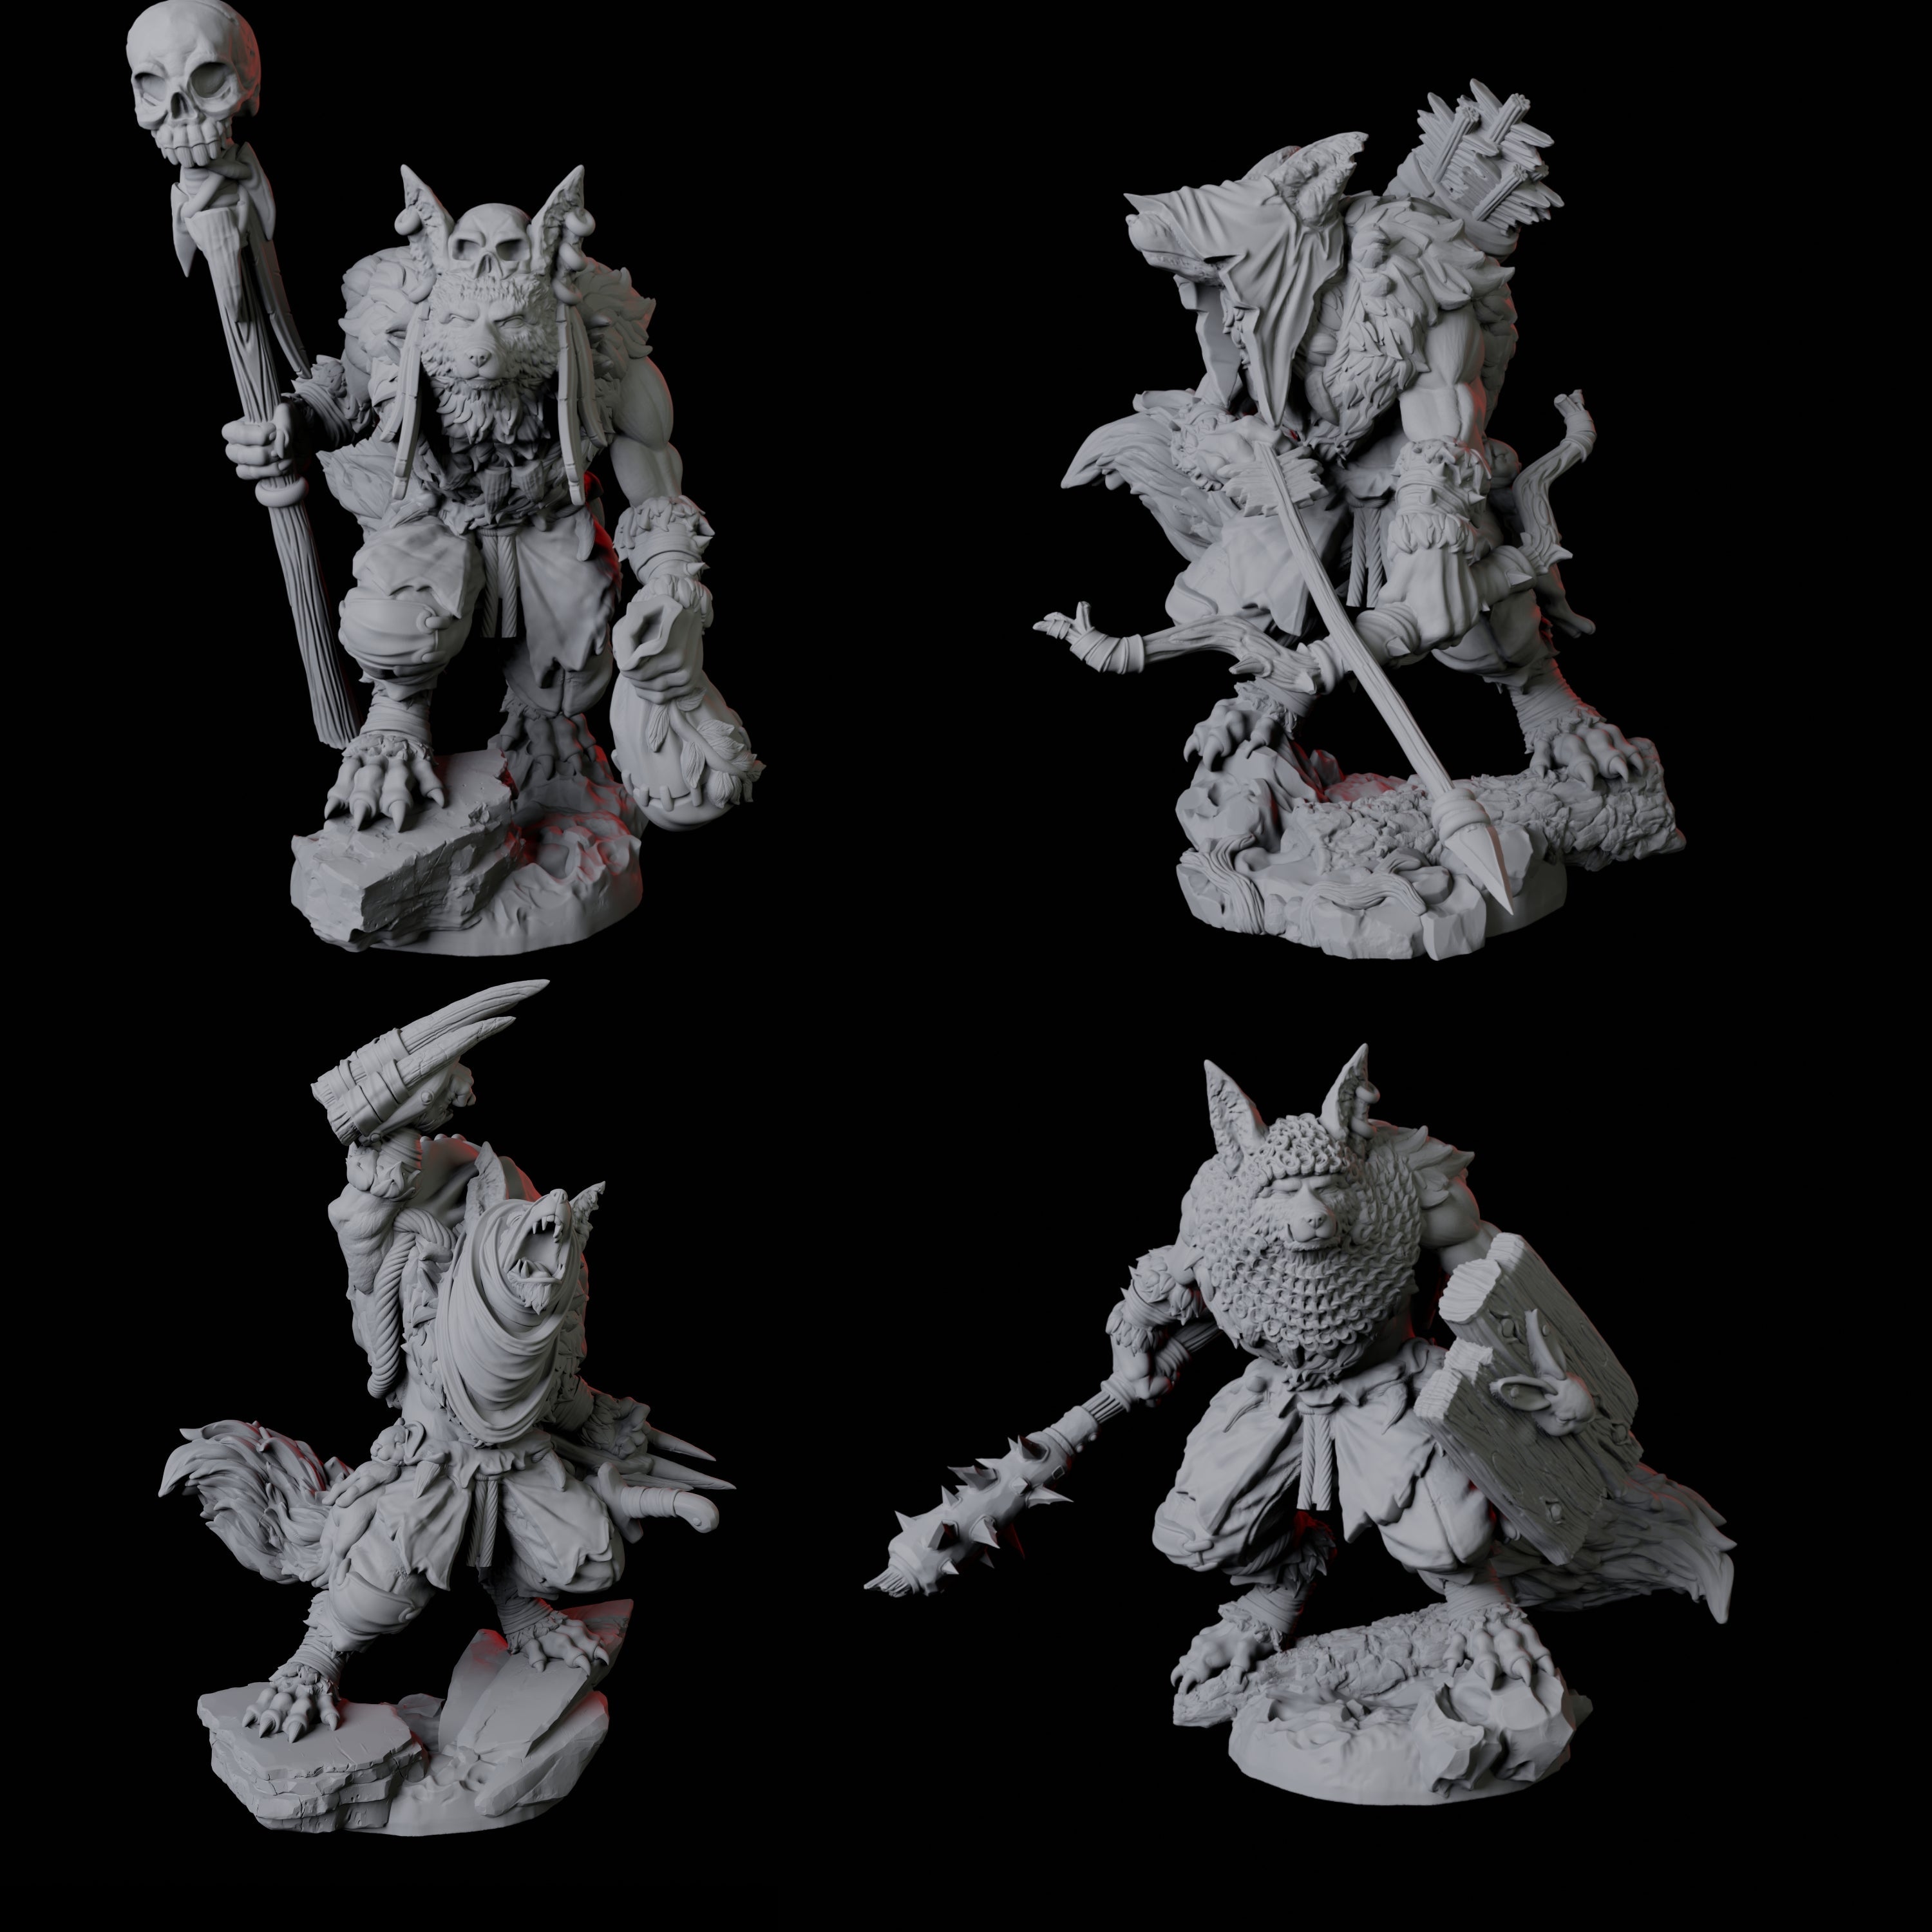 Four Cunning Kitsune Fighters Miniature for Dungeons and Dragons, Pathfinder or other TTRPGs